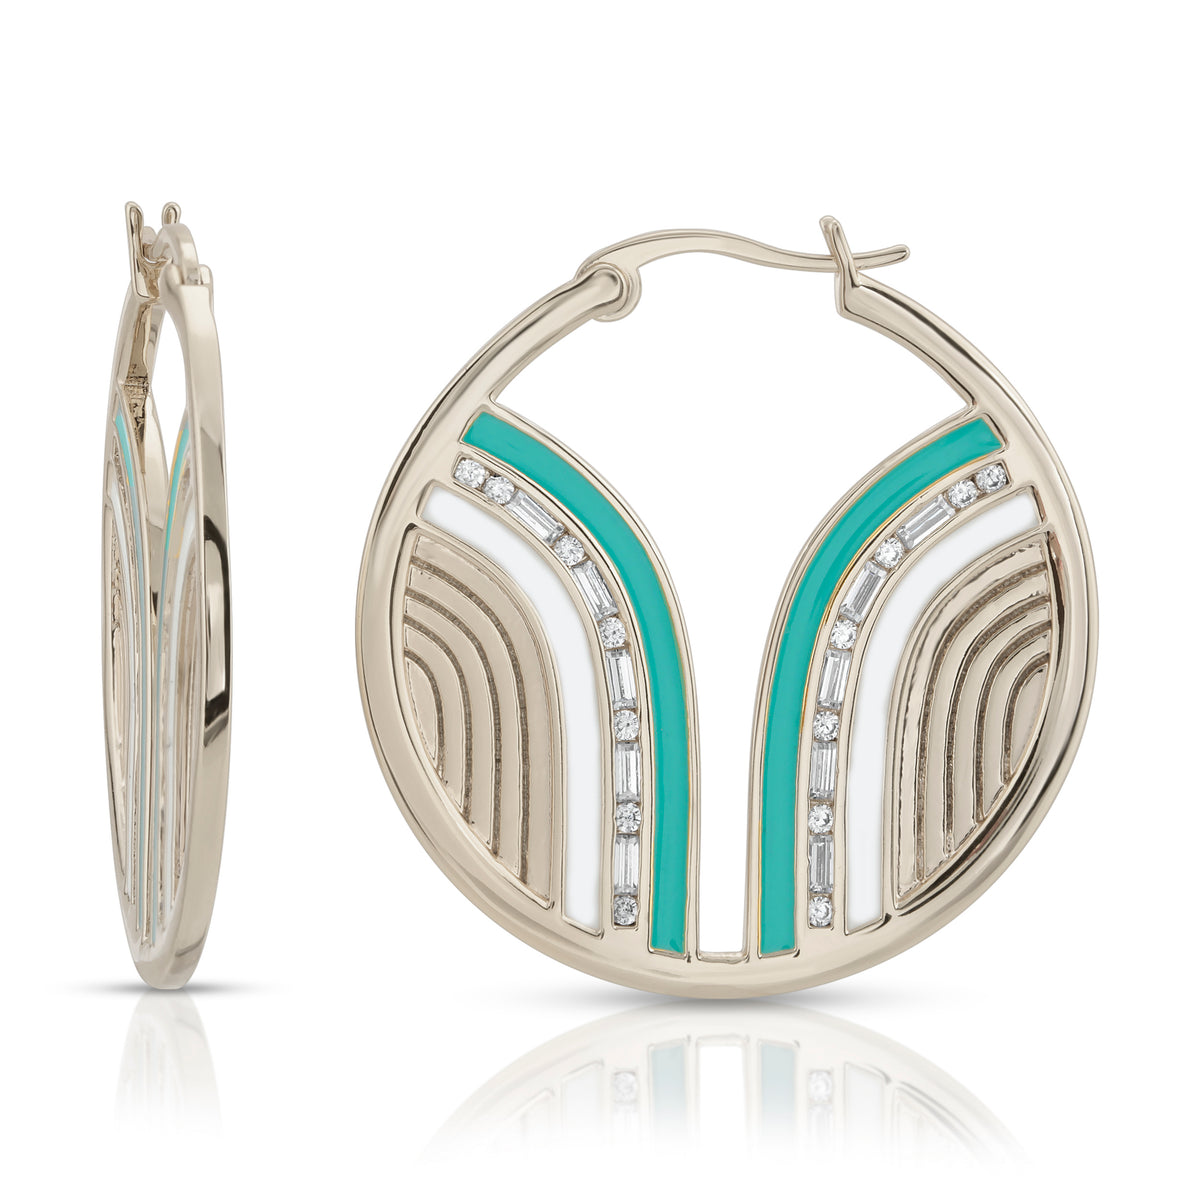 South Beach Hoops- Turquoise/White